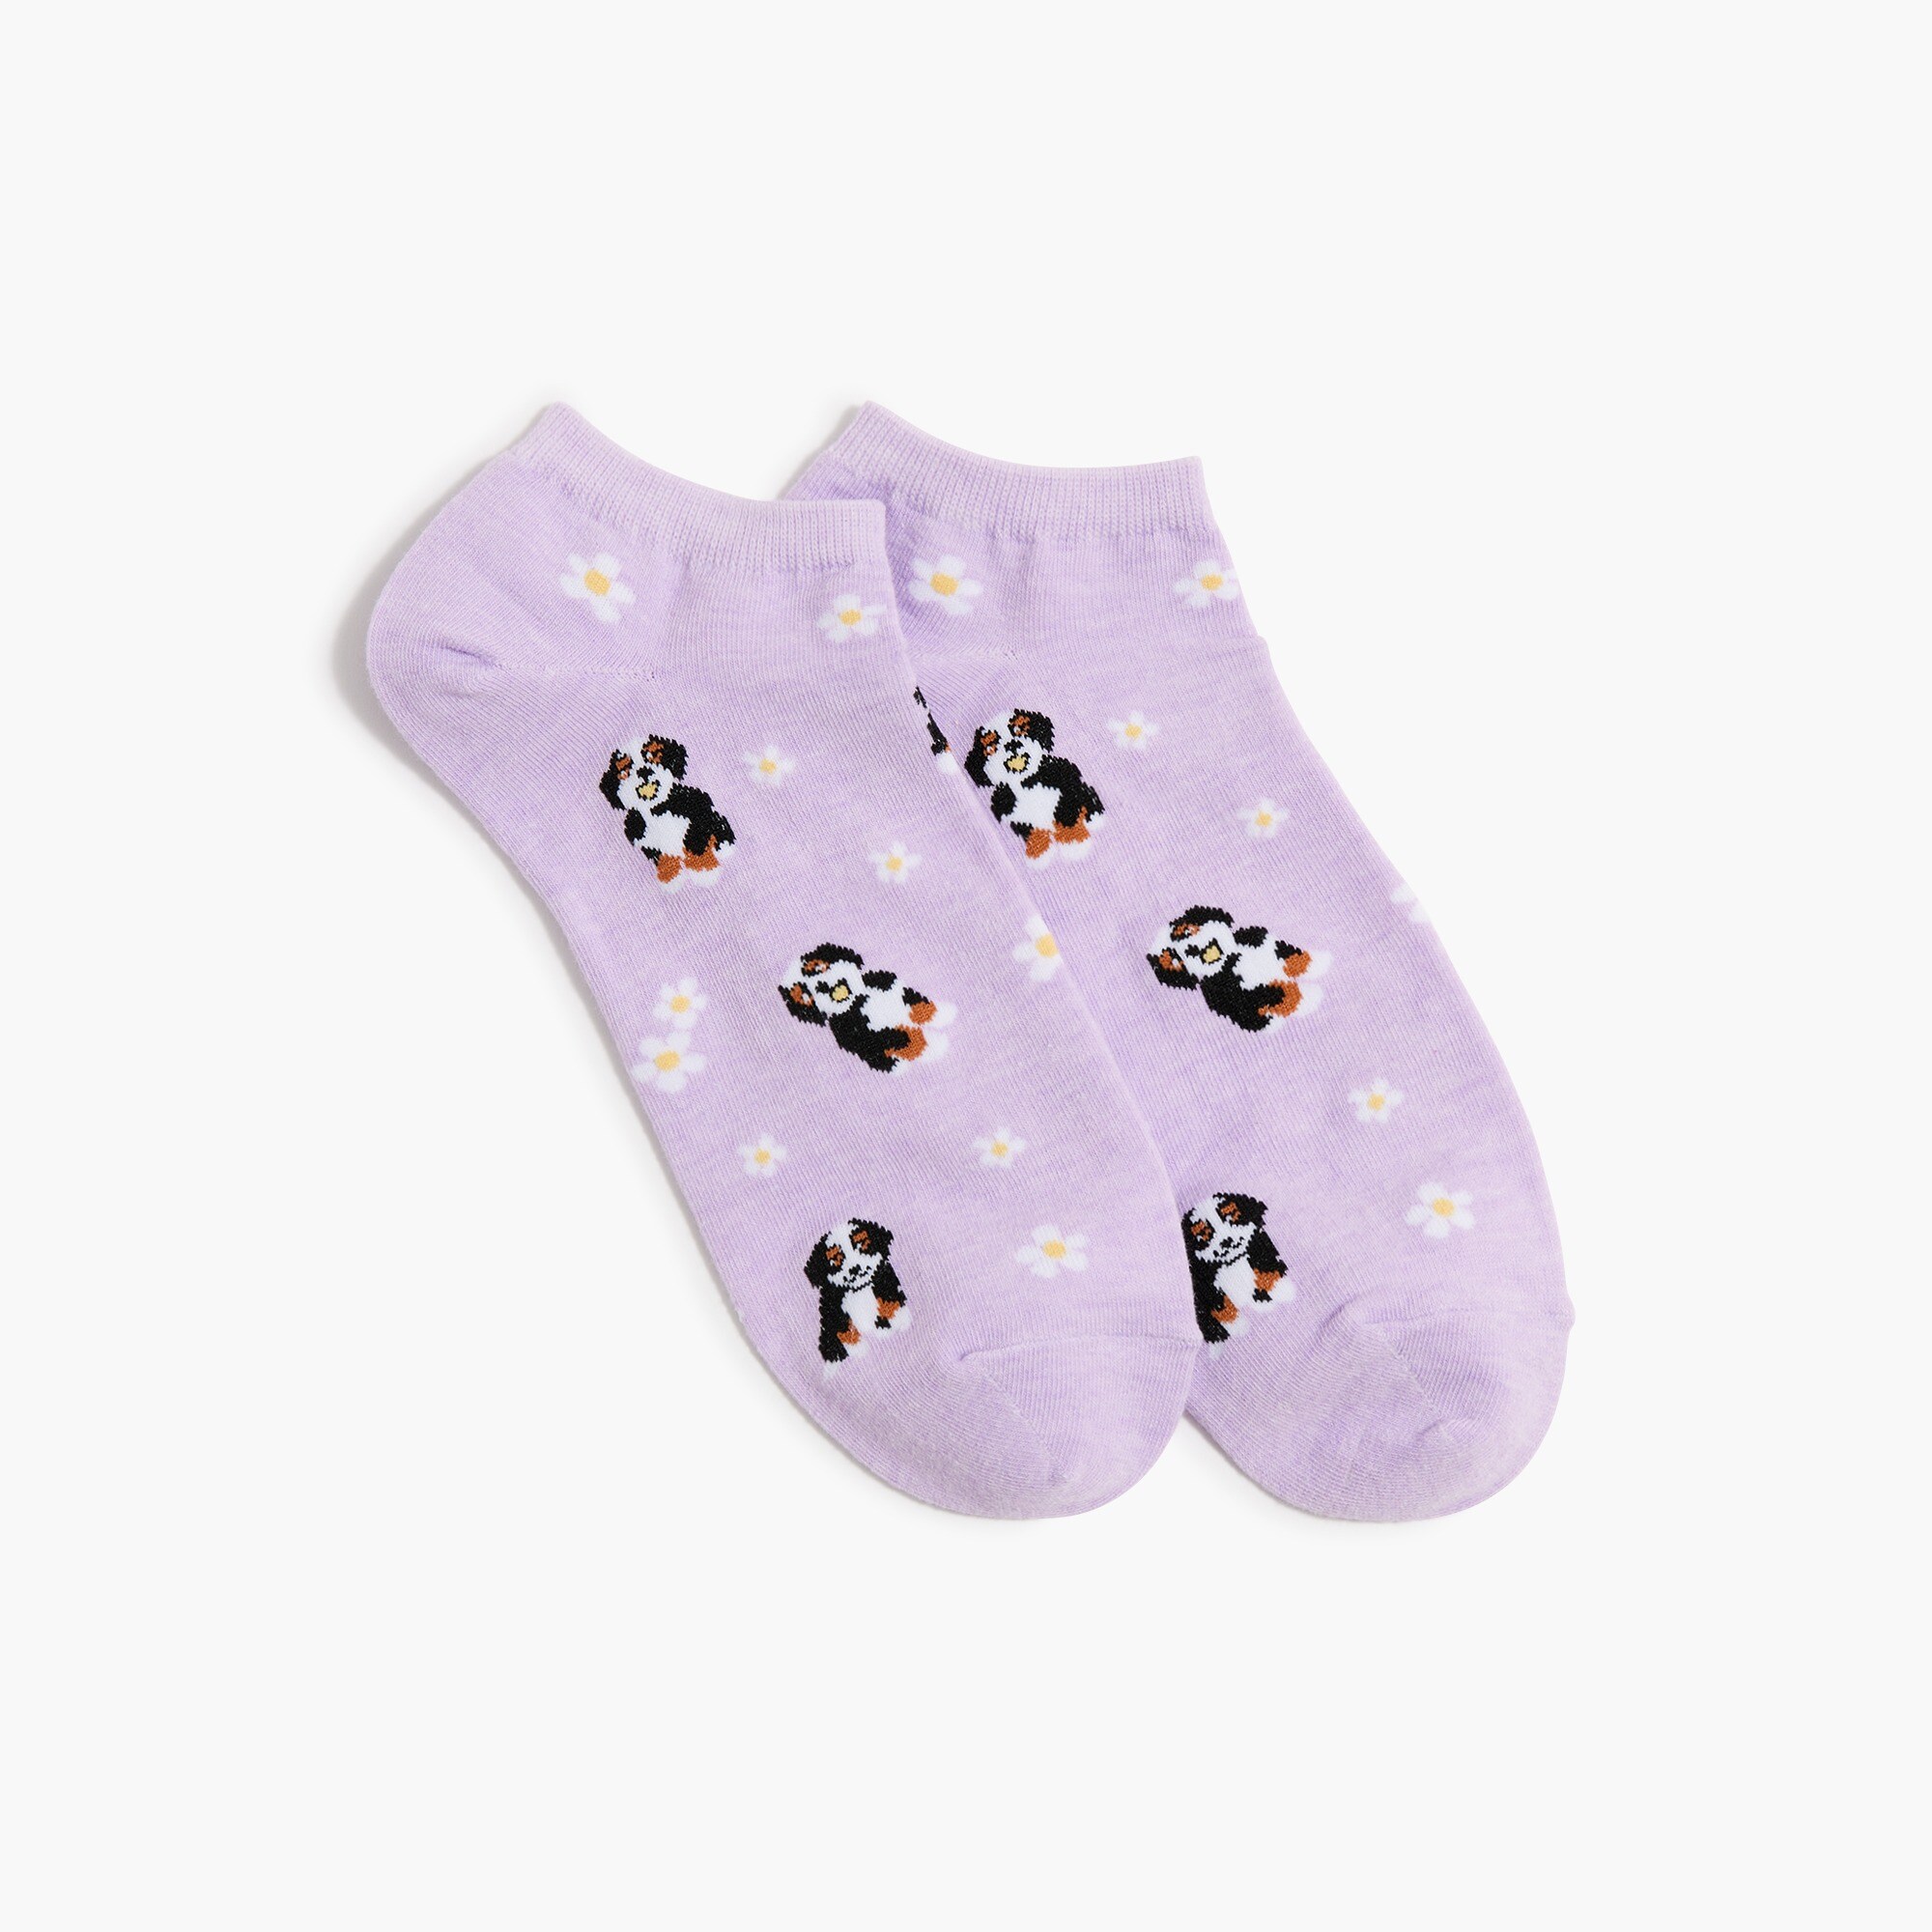 Jcrew Dogs and flowers ankle socks